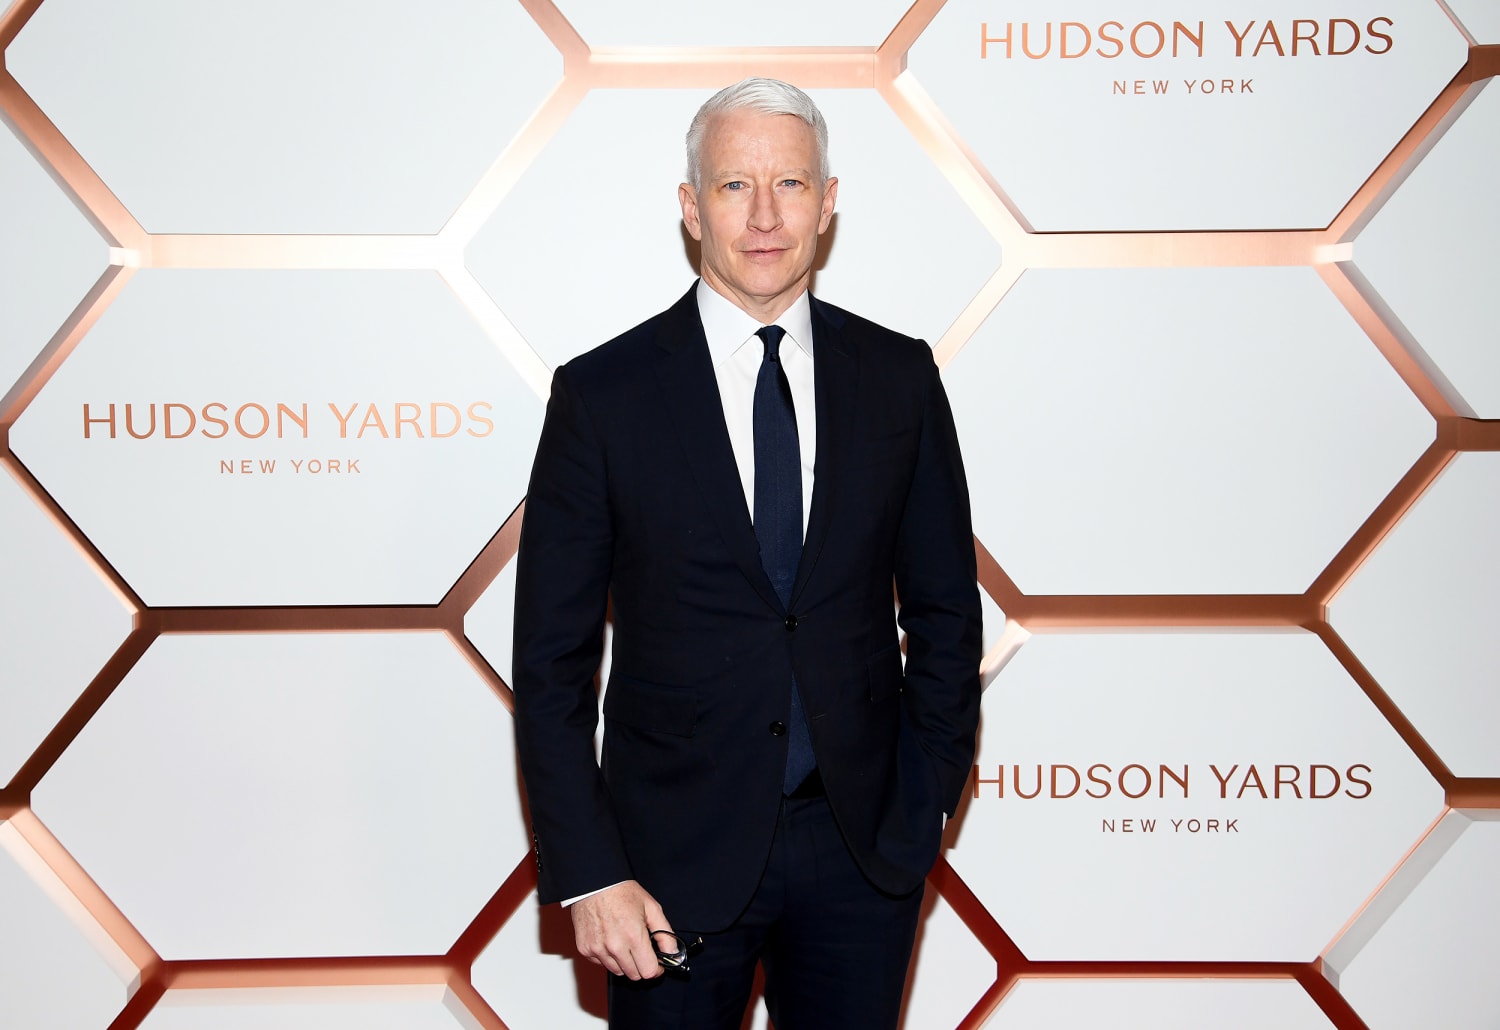 Anderson Cooper reveals his peaceful daily routine with sons Wyatt and Sebastian